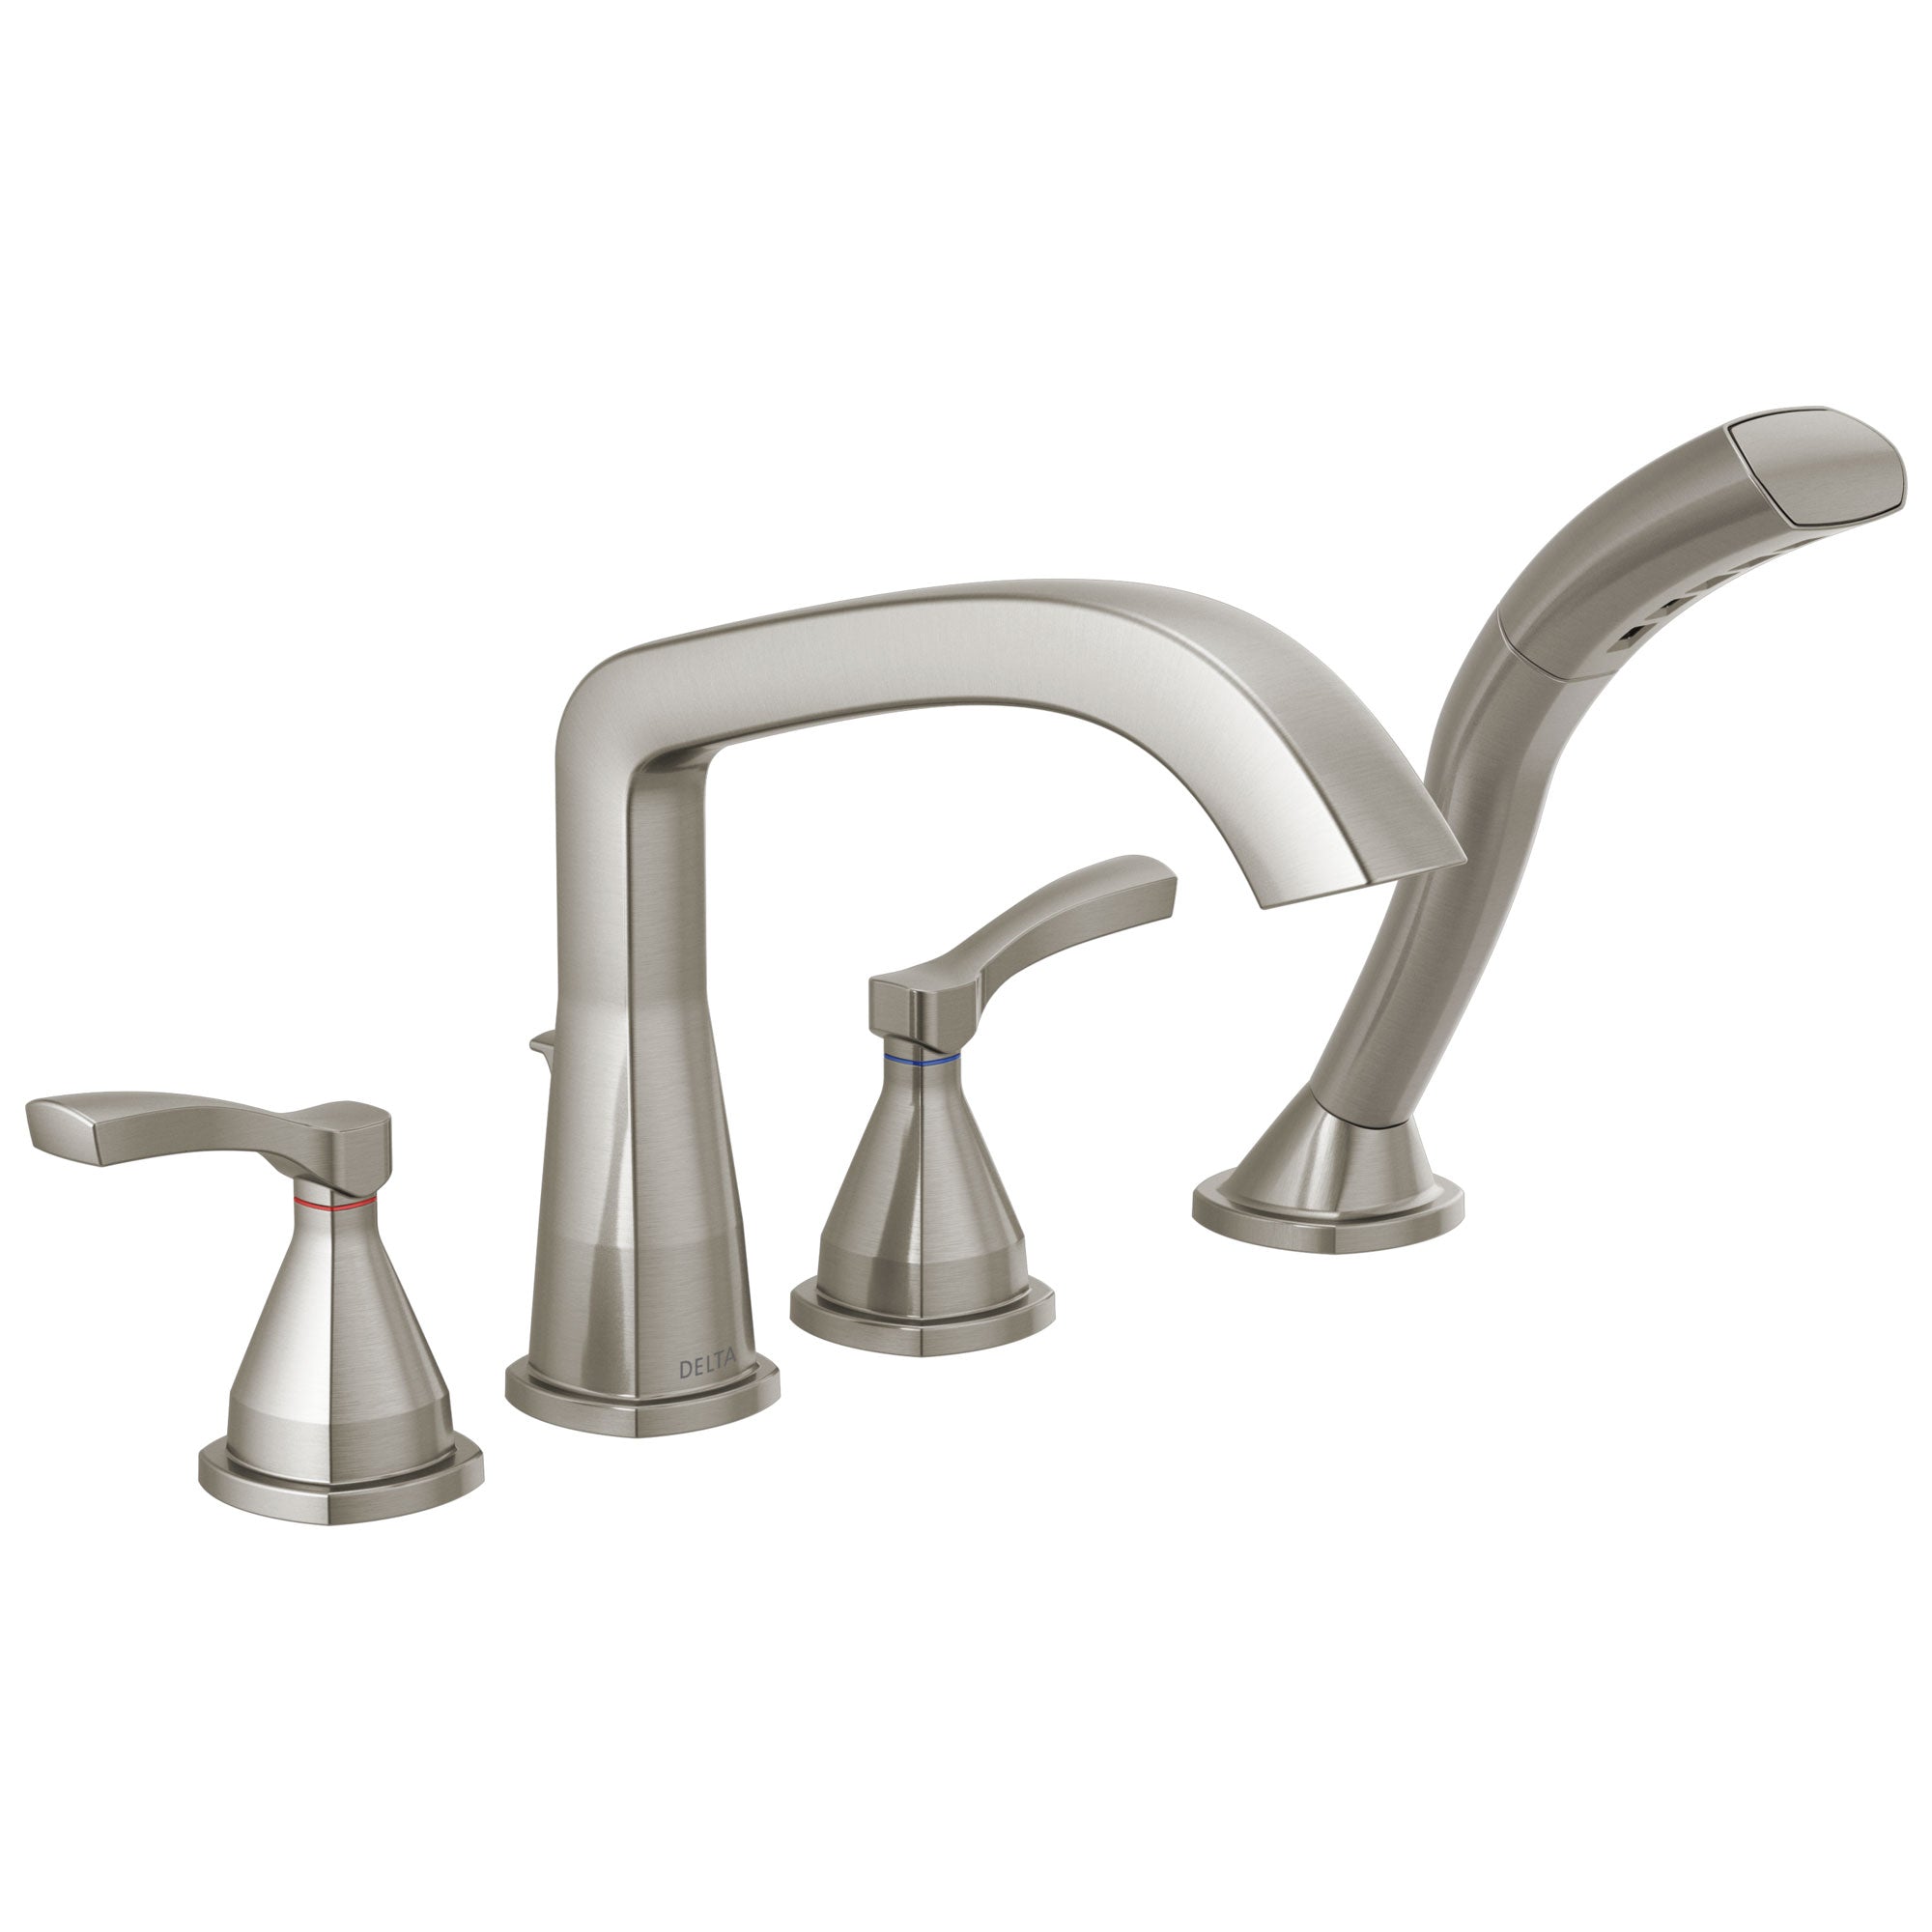 Delta Stryke Stainless Steel Finish Four Hole Deck Mount Roman Tub Filler Faucet Trim Kit with Hand Shower (Requires Valve) DT4776SS